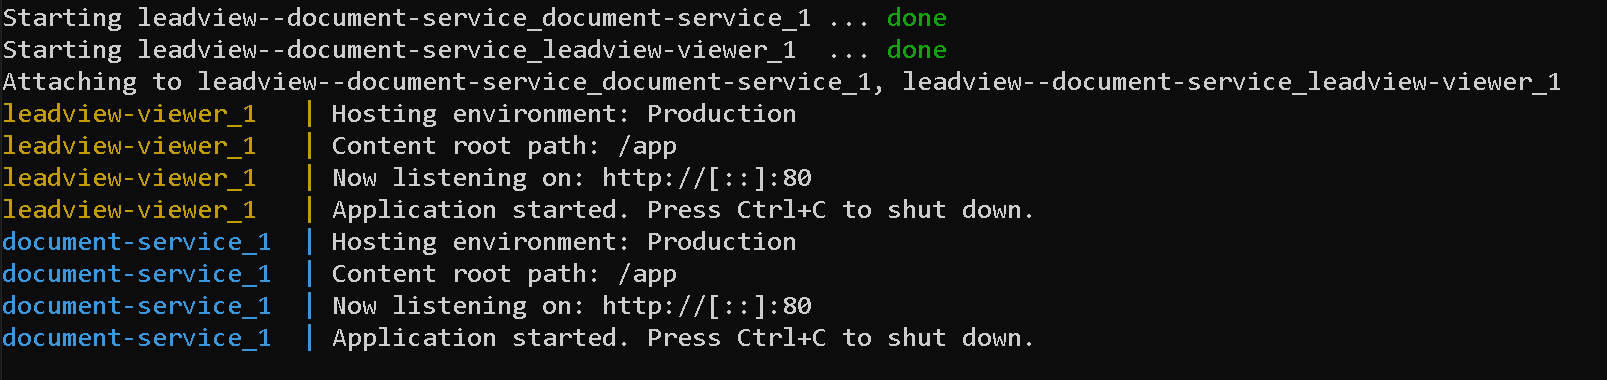 Terminal message confirming both LEADVIEW and Document Service are running